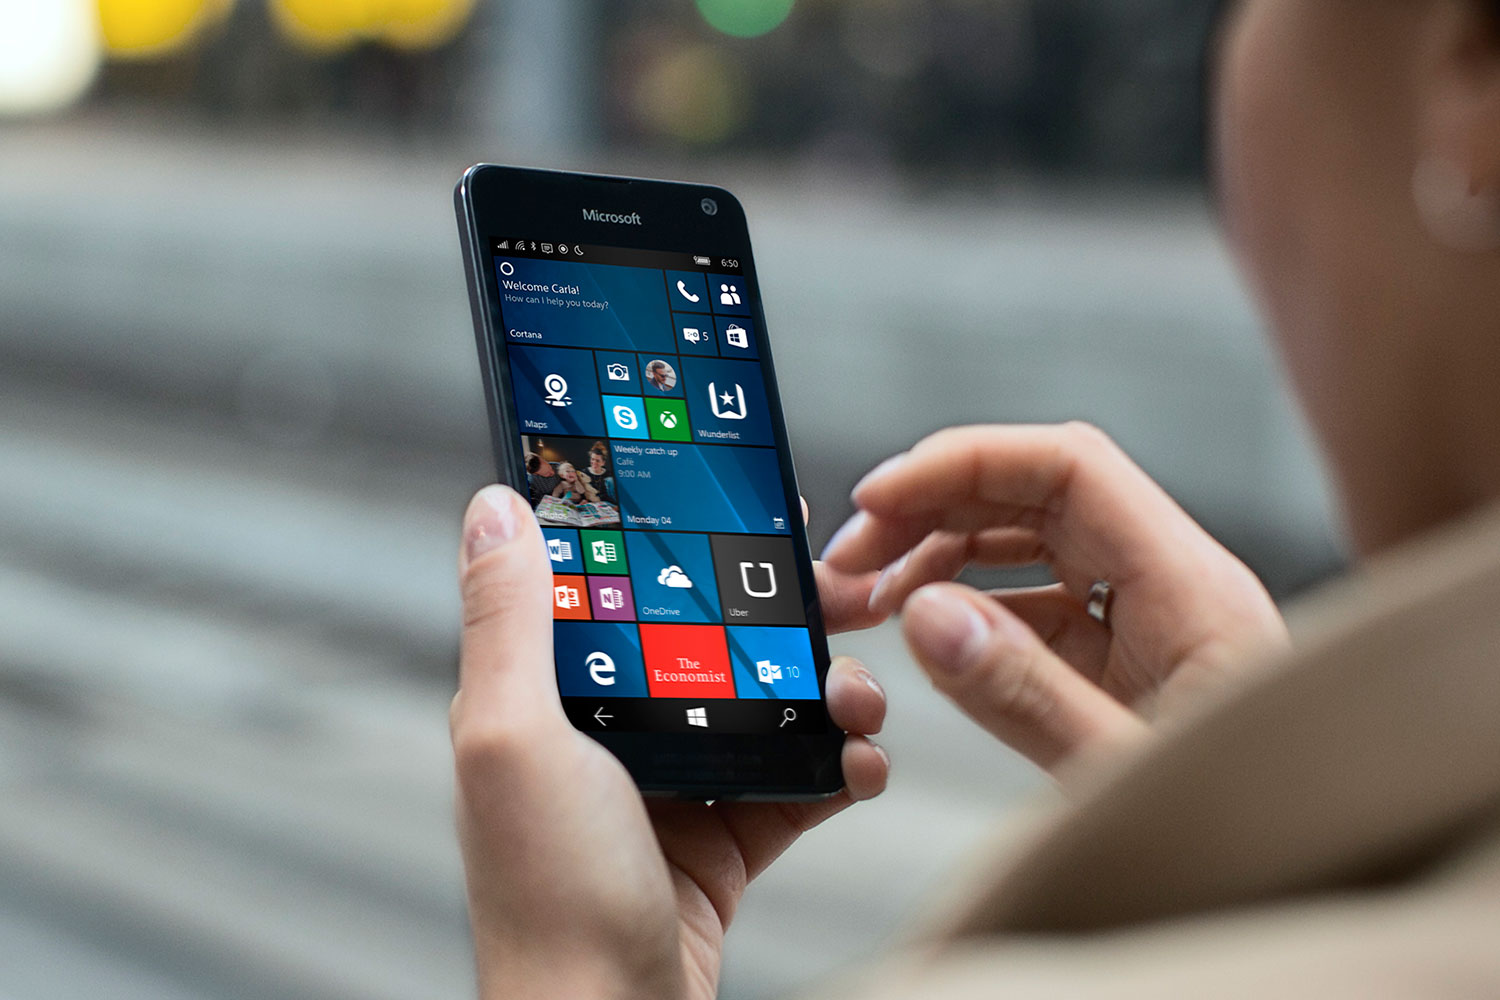 Windows Phone is Superior; Why Hasn't it Taken Off?